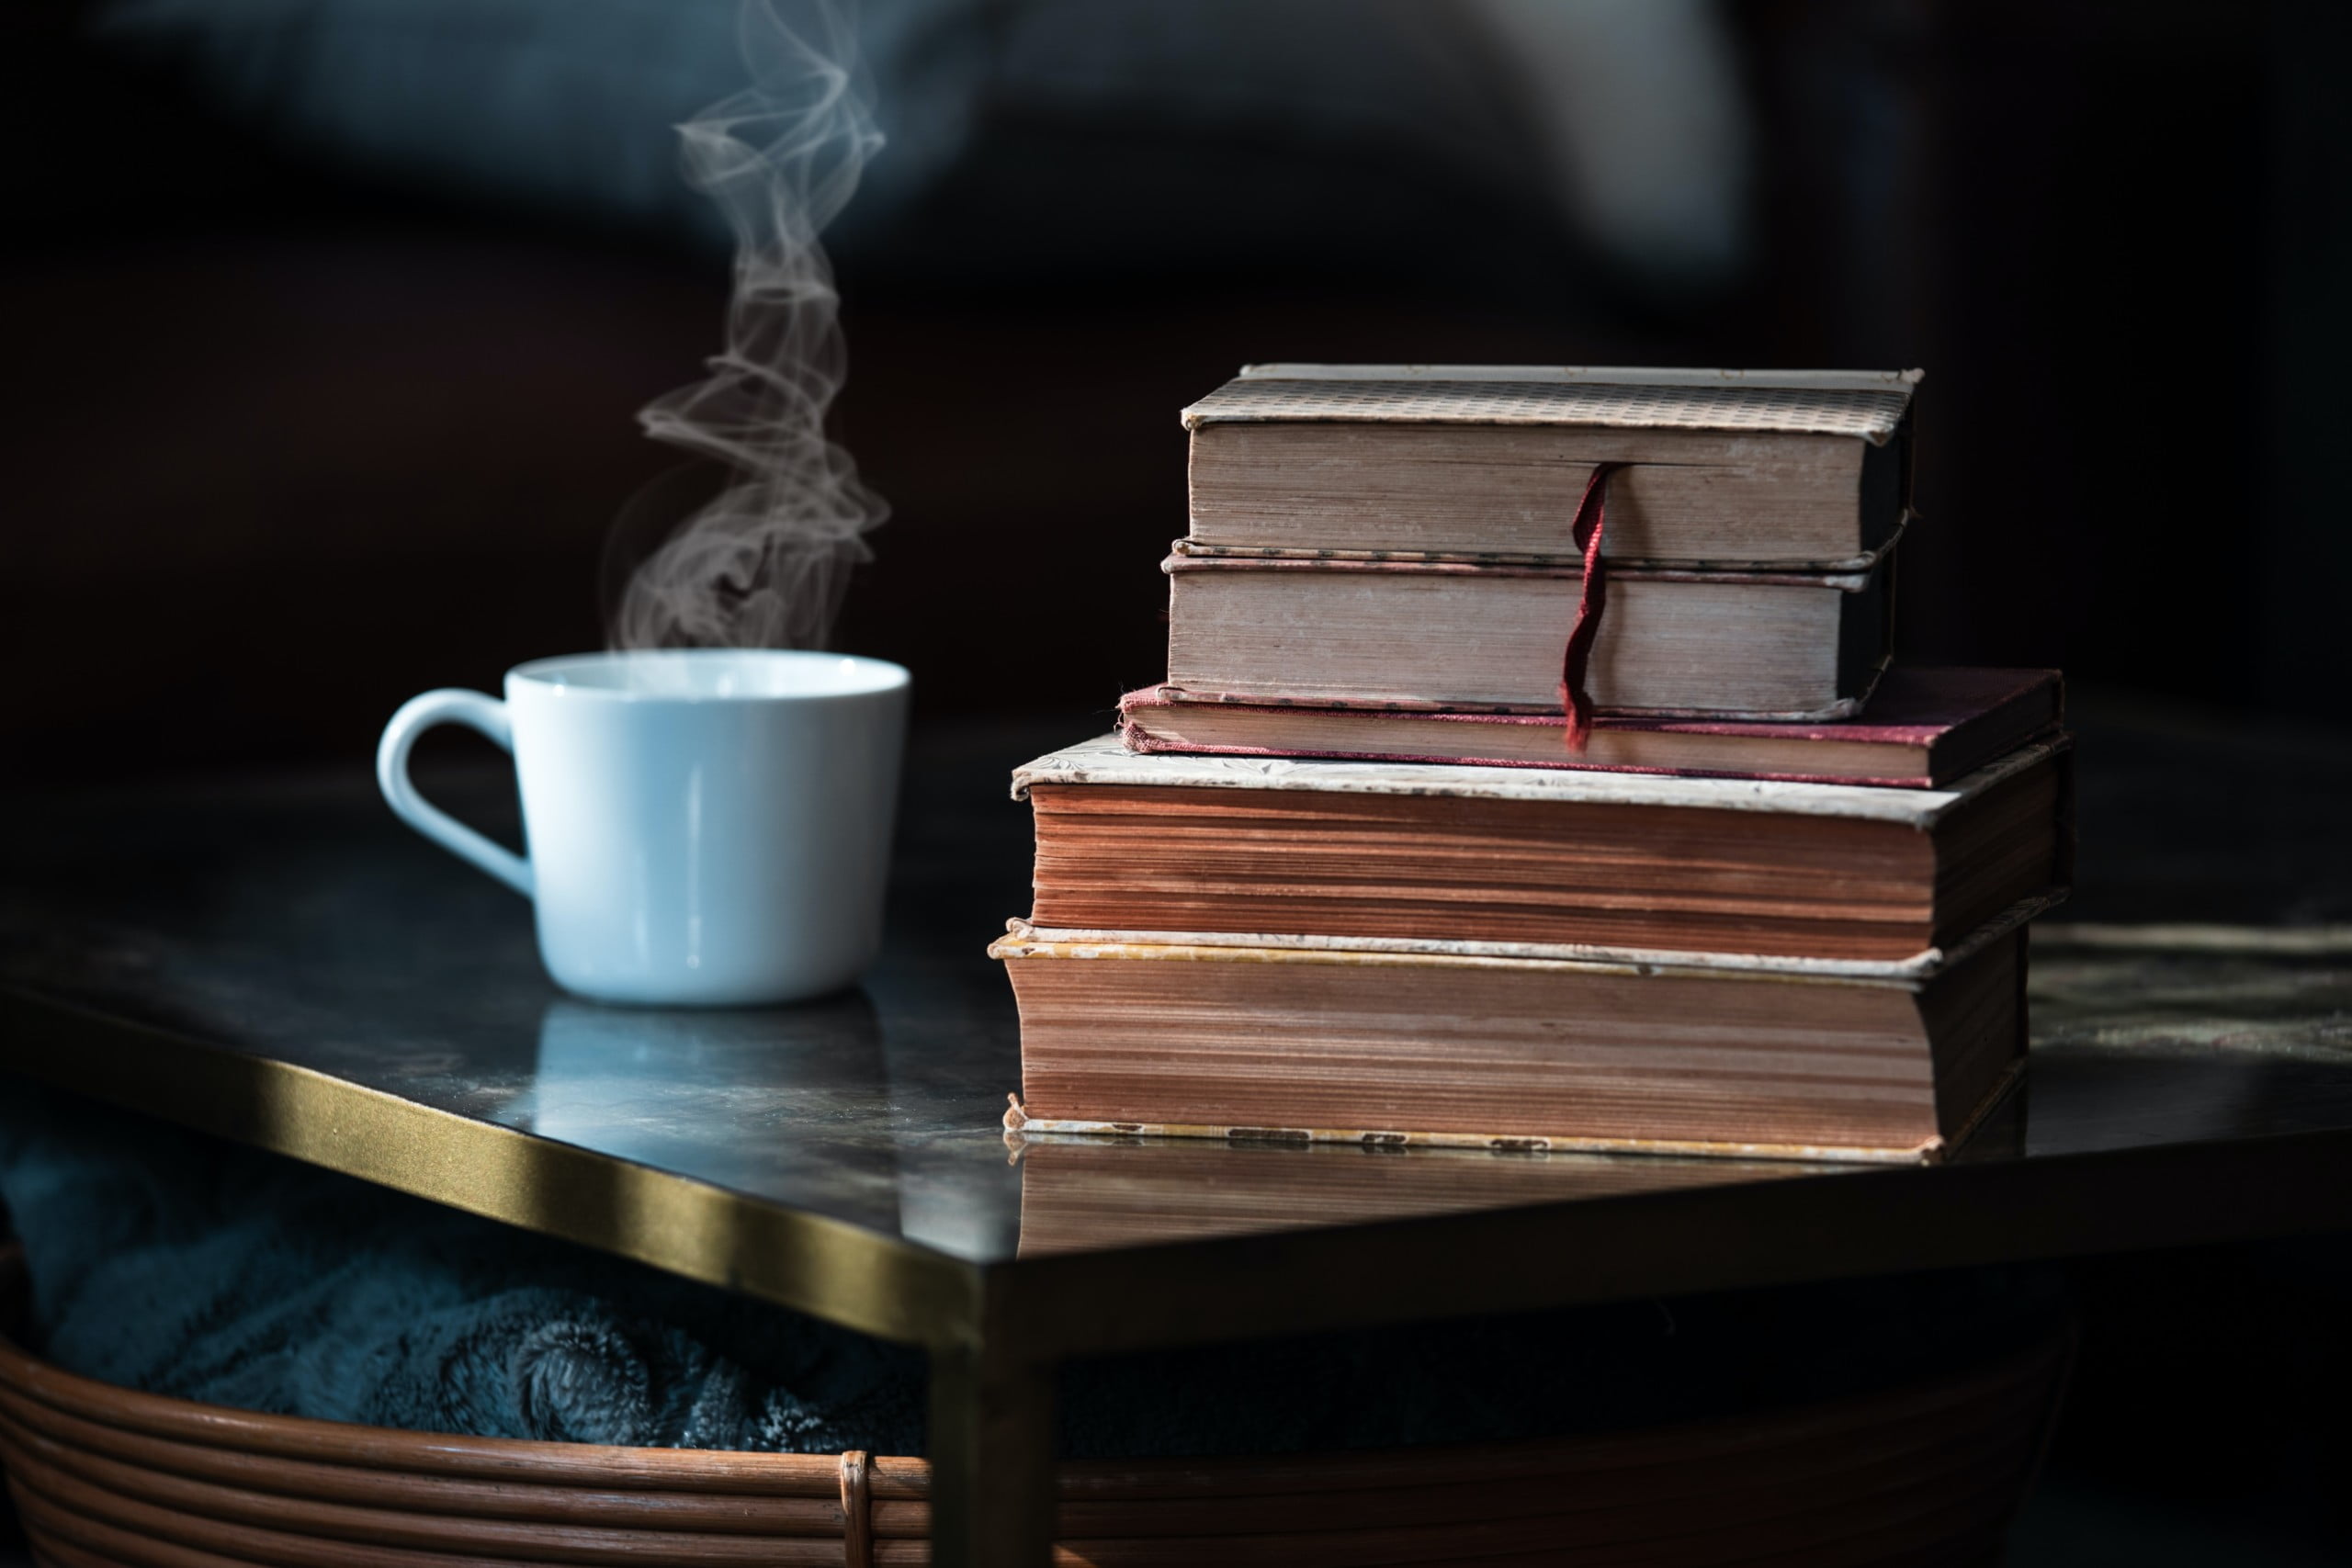 A steaming cup of coffee next to a stack of old books